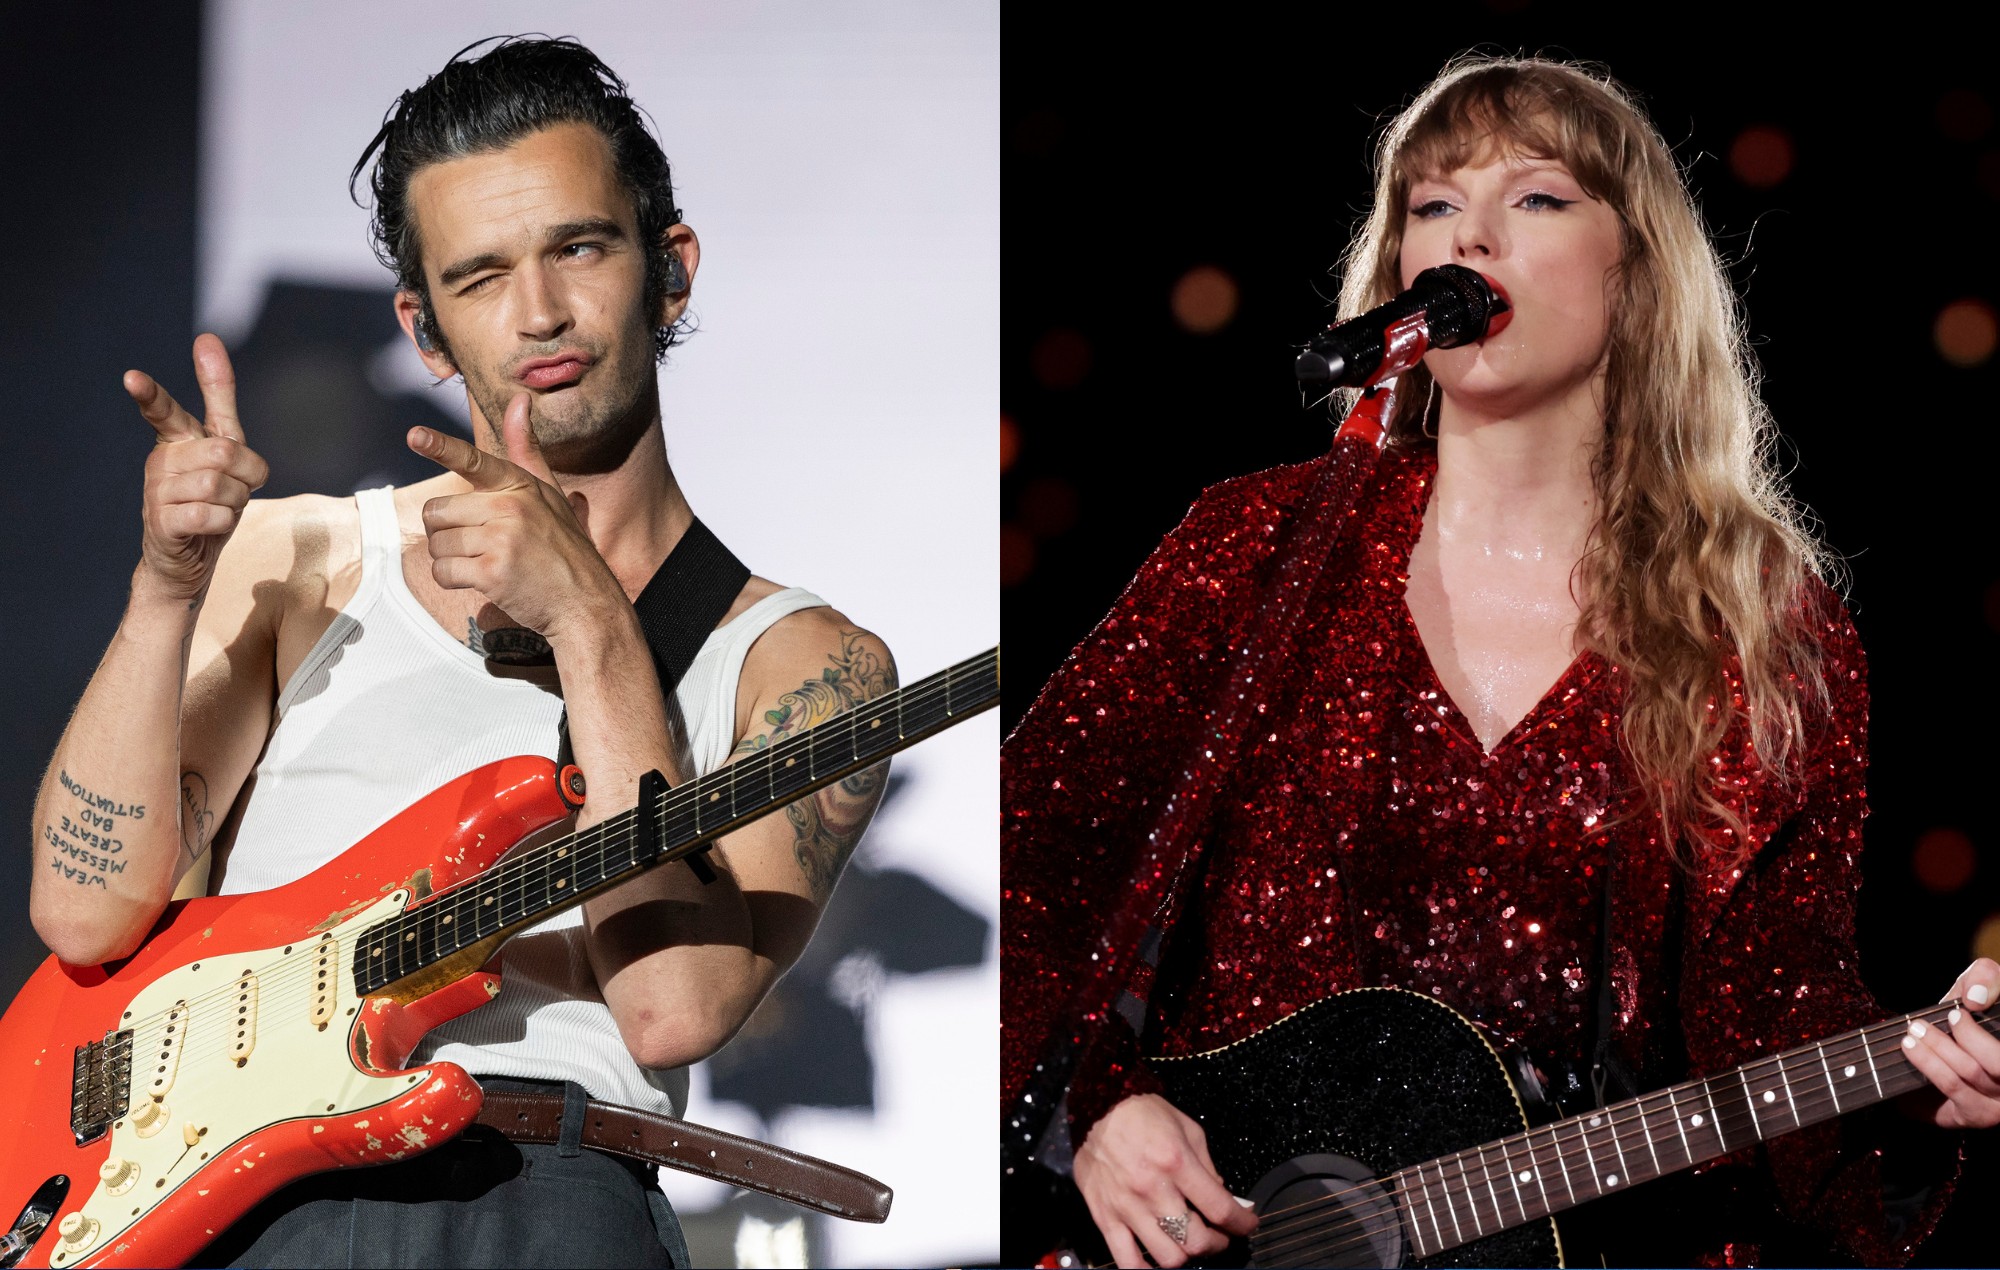 Watch The 1975’s Matty Healy respond to Taylor Swift’s ‘The Tortured Poets Department’